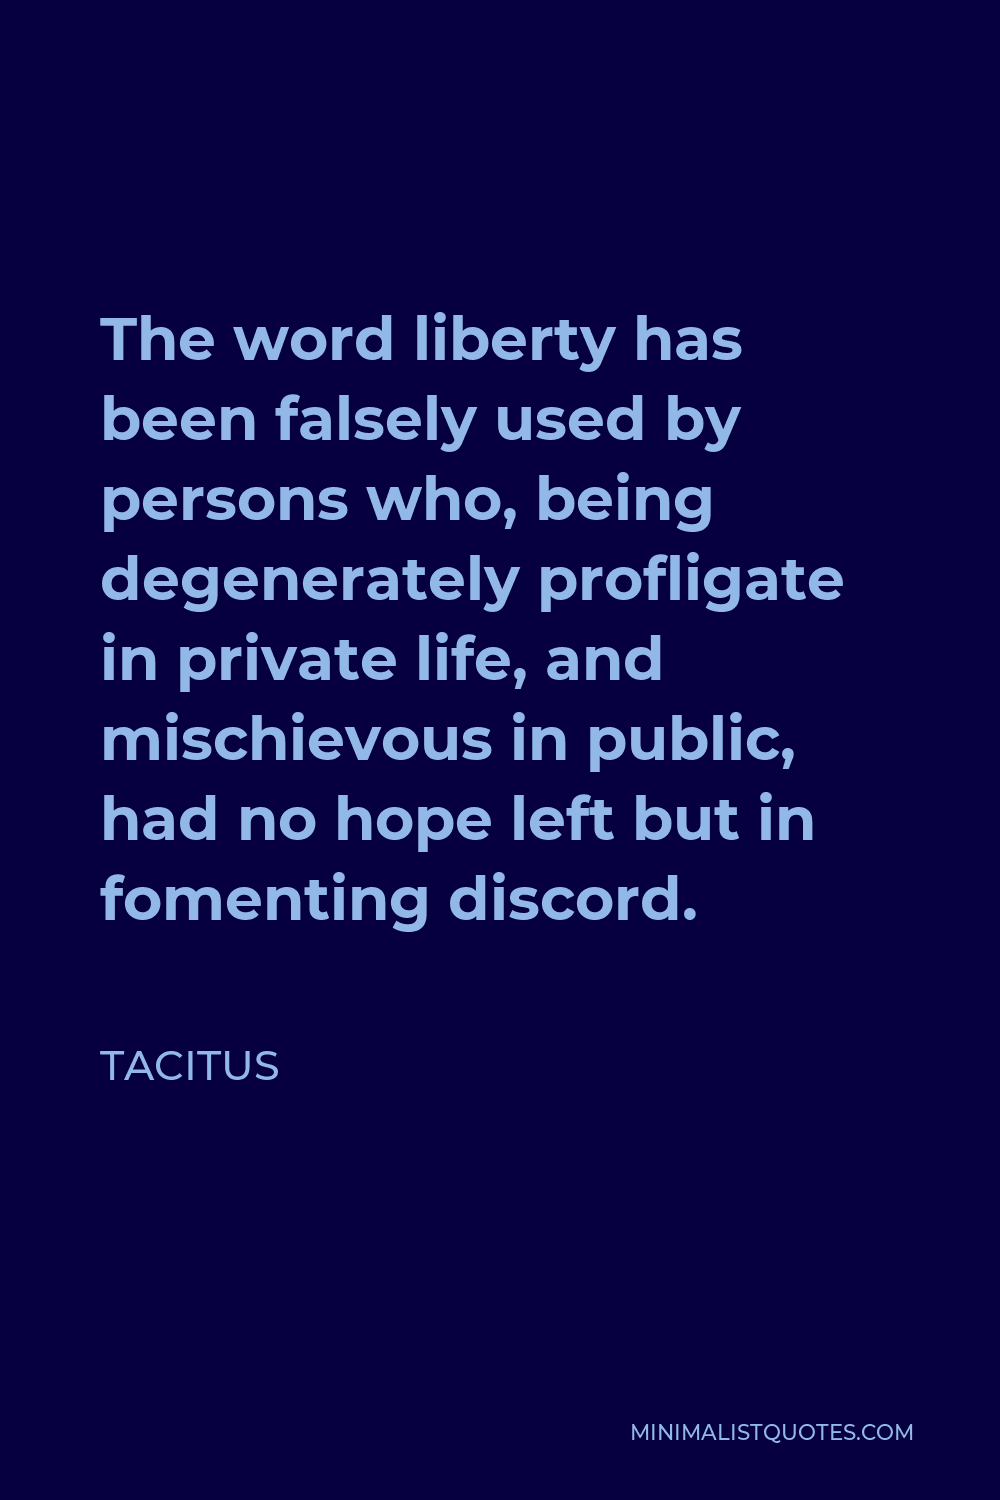 Tacitus Quote - The word liberty has been falsely used by persons who, being degenerately profligate in private life, and mischievous in public, had no hope left but in fomenting discord.